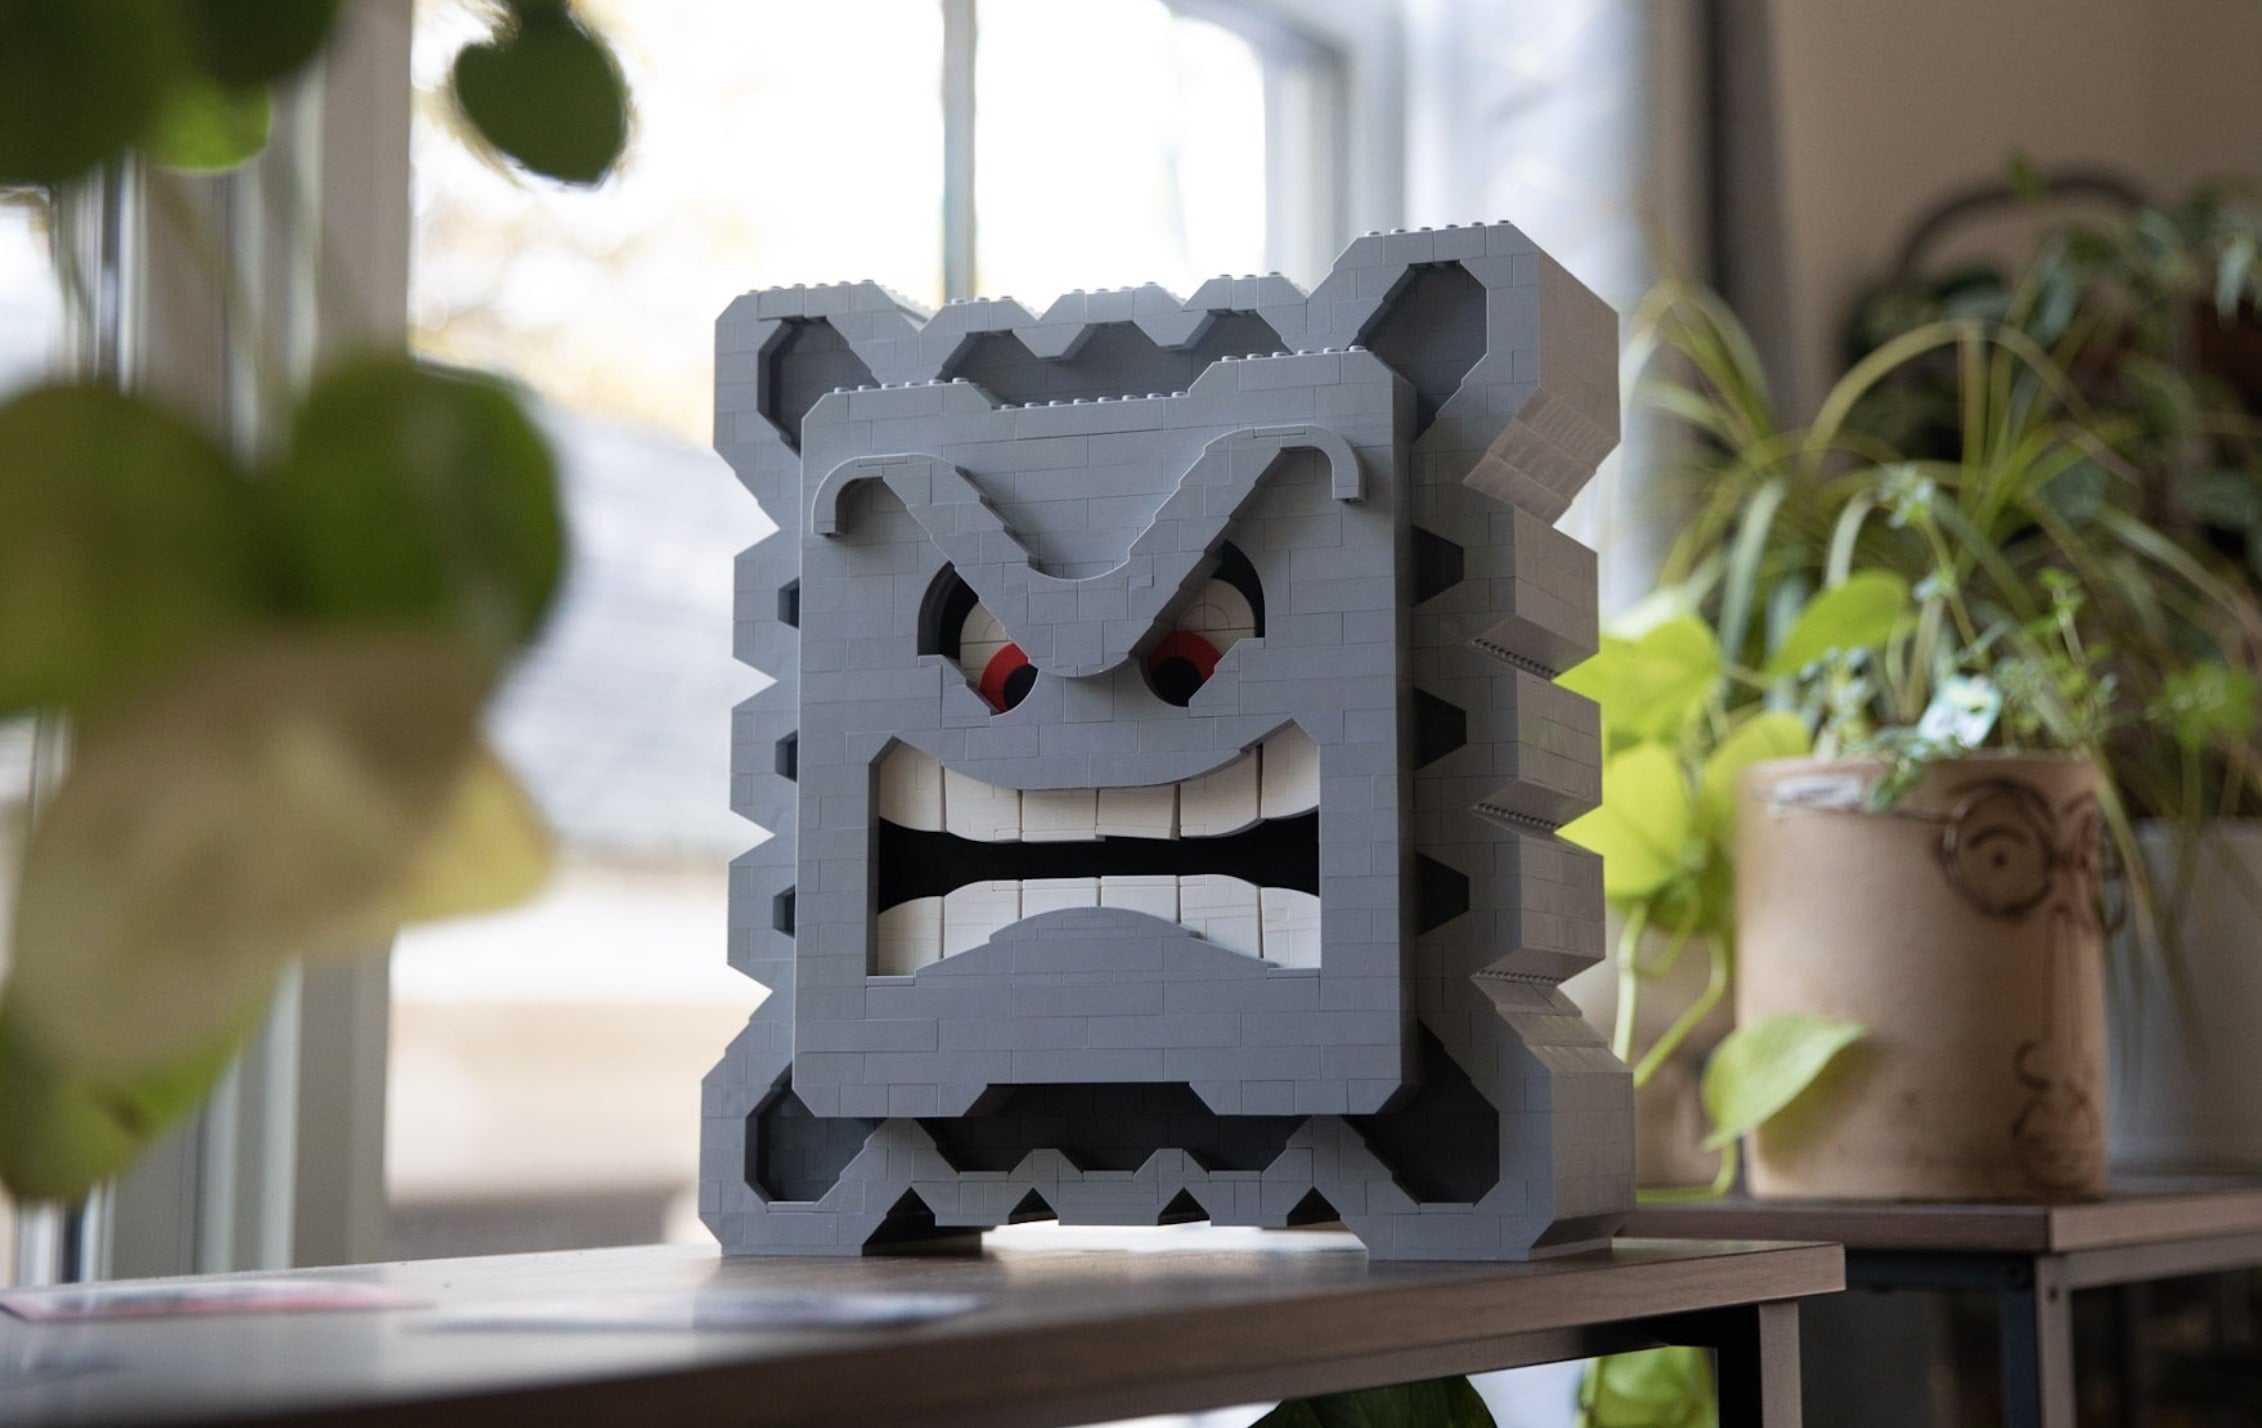 Angry Block in Lifestyle Setting Built with LEGO Bricks by Bricker Builds